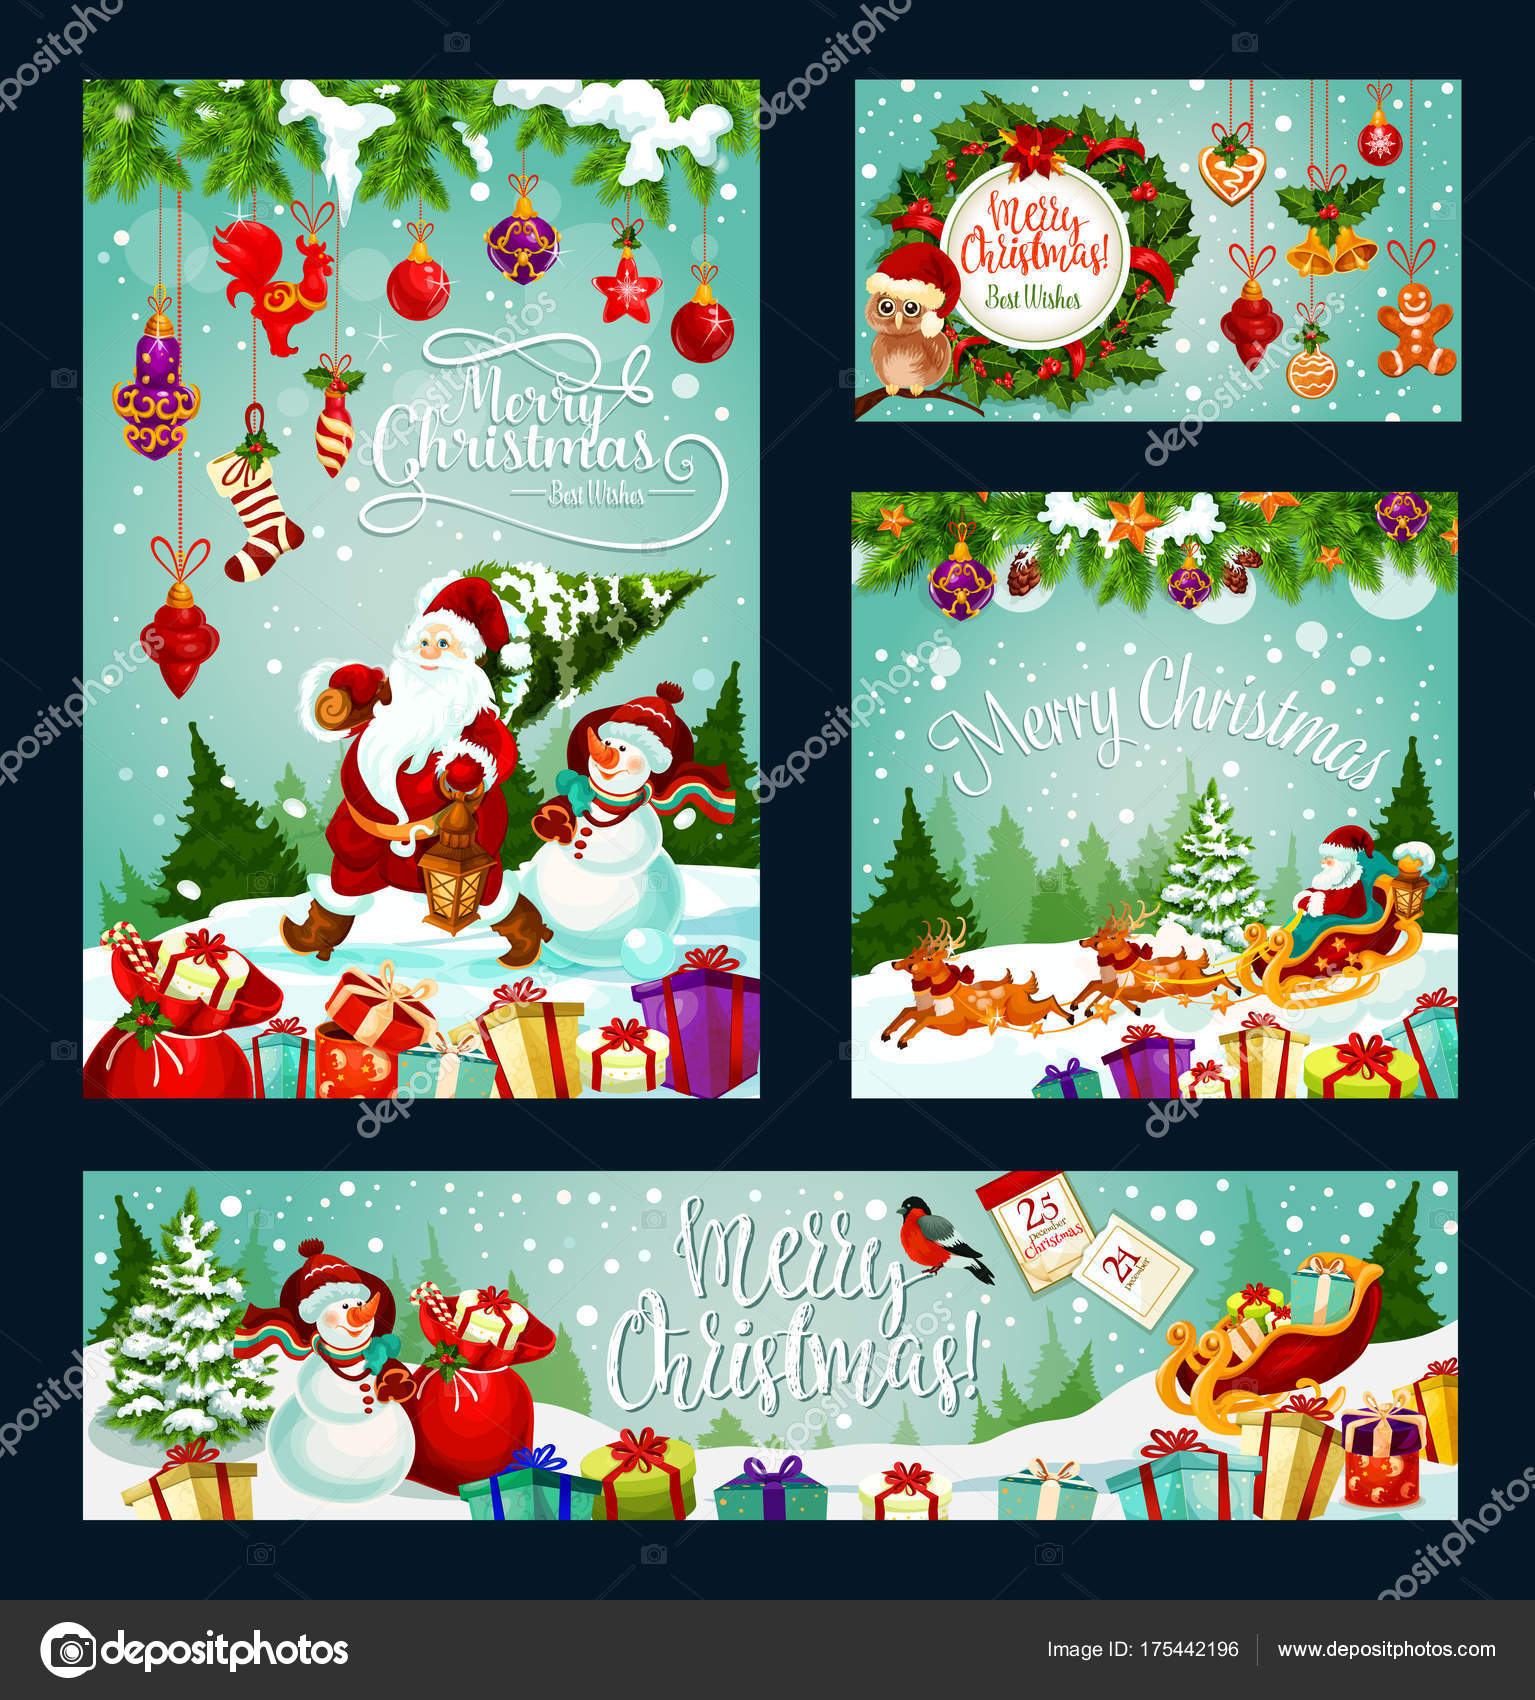 Christmas winter holiday greeting banner Santa Claus snowman and Xmas t holly and pine tree wreath with ribbon bell and snowflake New Year garland